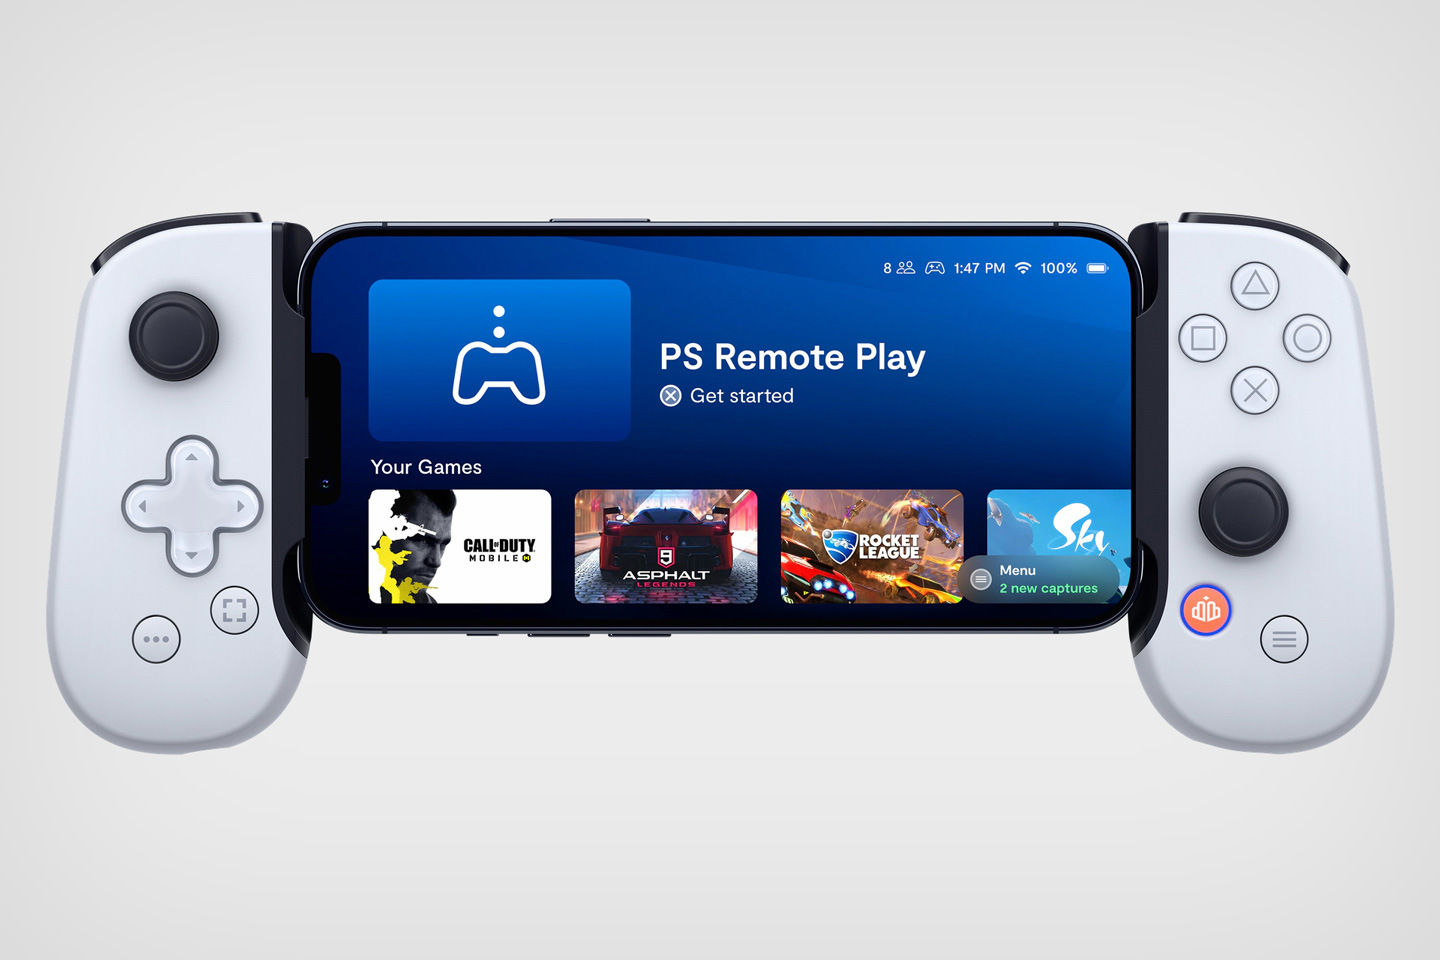 #Backbone’s official PlayStation controller lets you play all your favorite PS titles on your phone